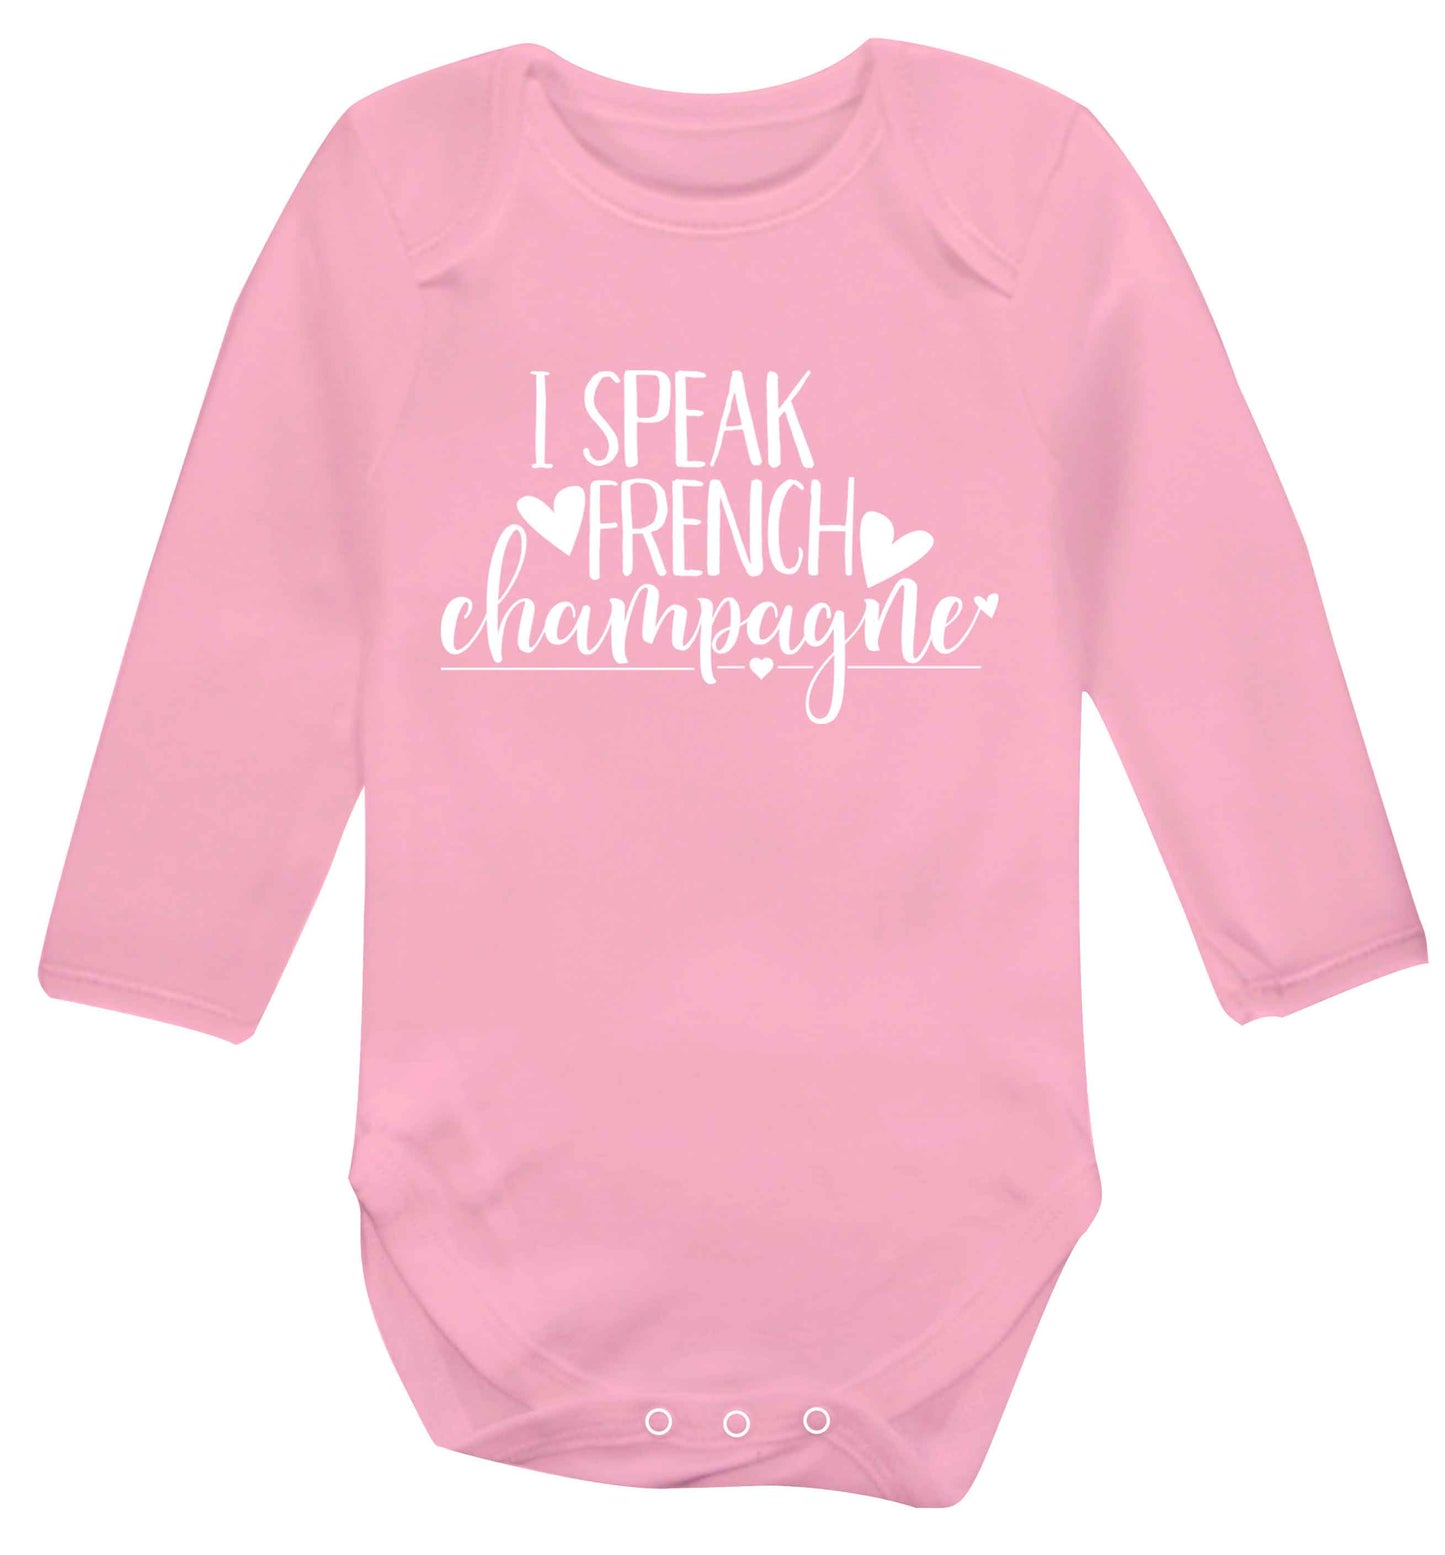 I speak french champagne Baby Vest long sleeved pale pink 6-12 months